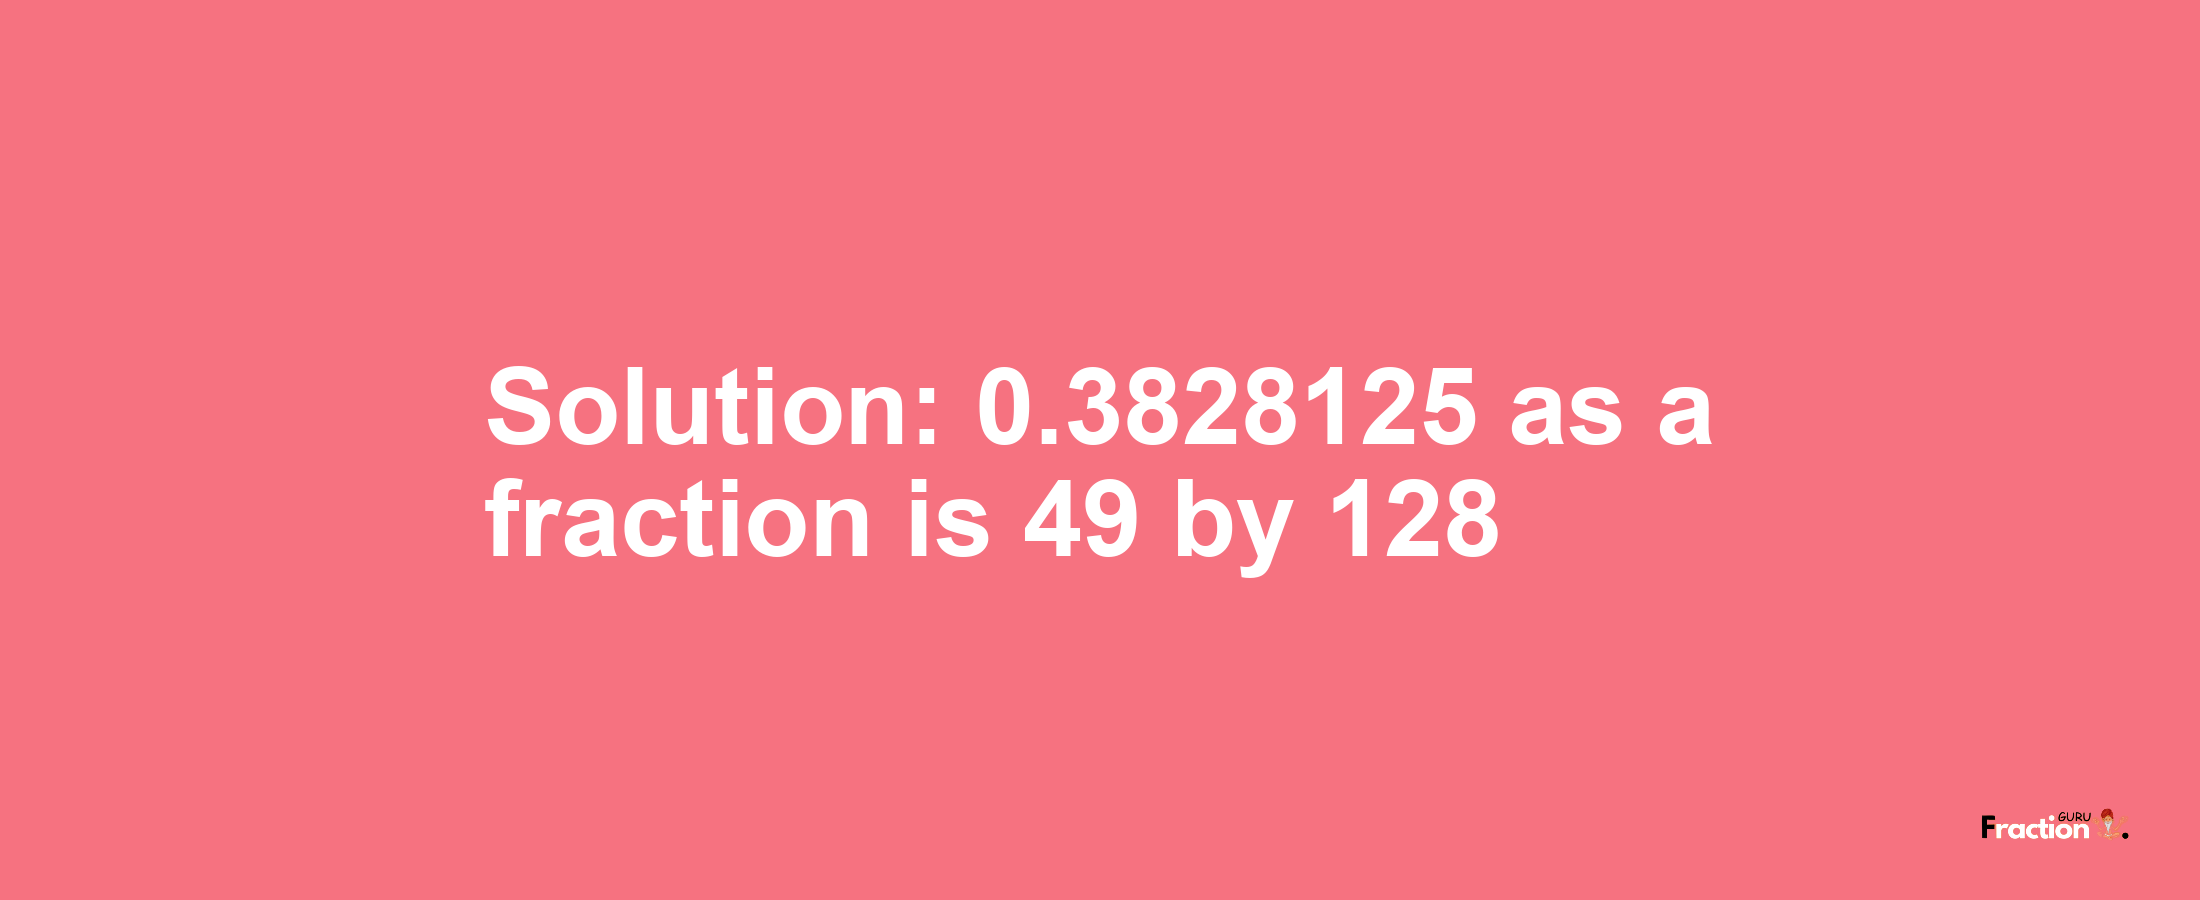 Solution:0.3828125 as a fraction is 49/128